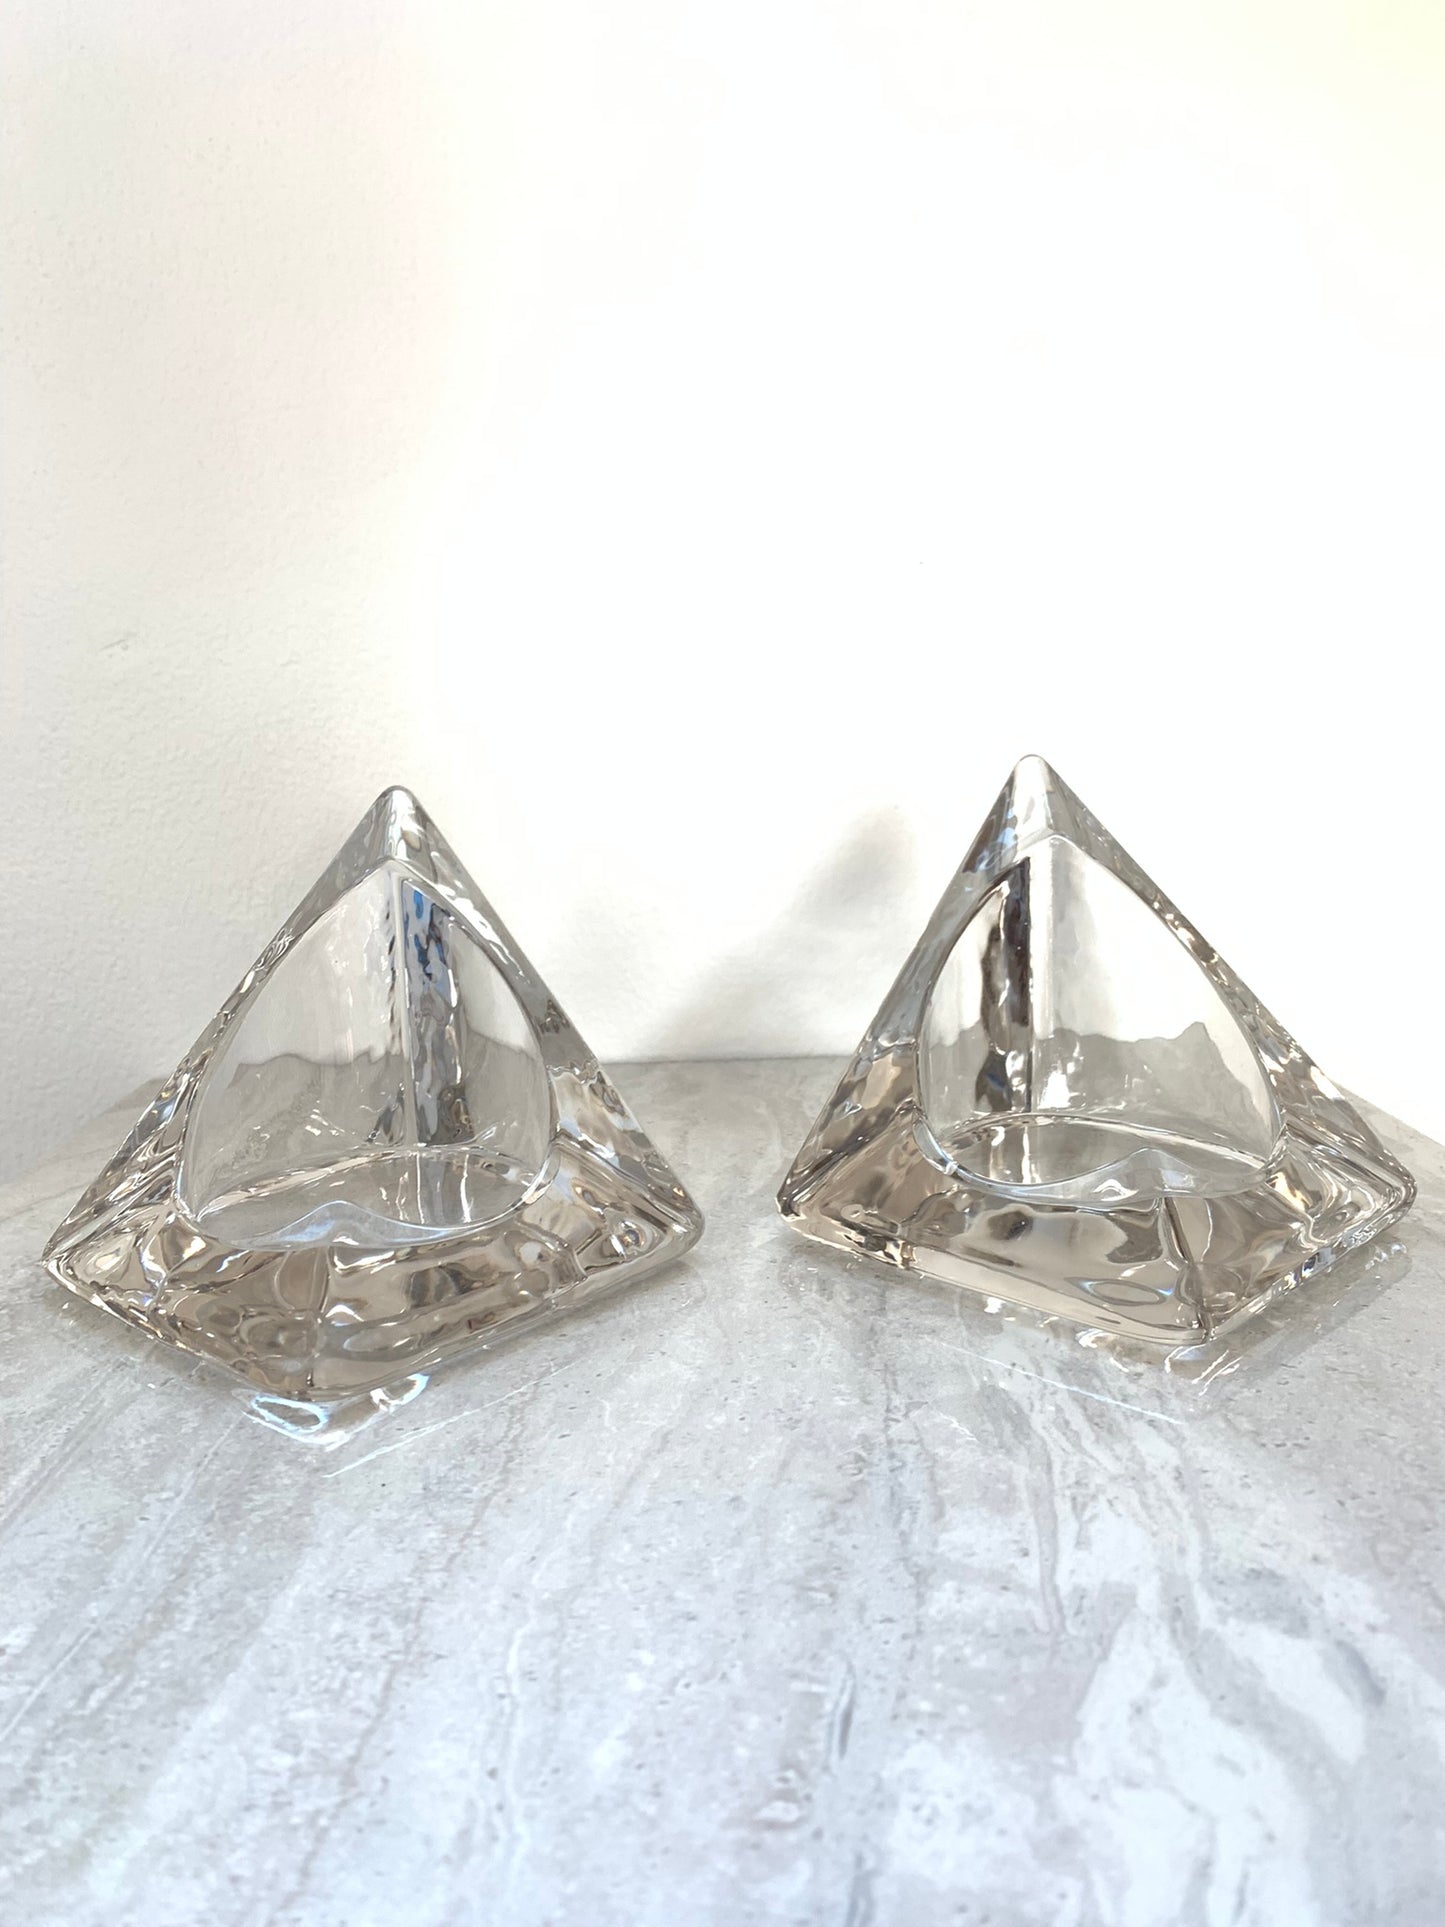 Vintage Nybro Swedish Candle Holder Bookends- a Pair